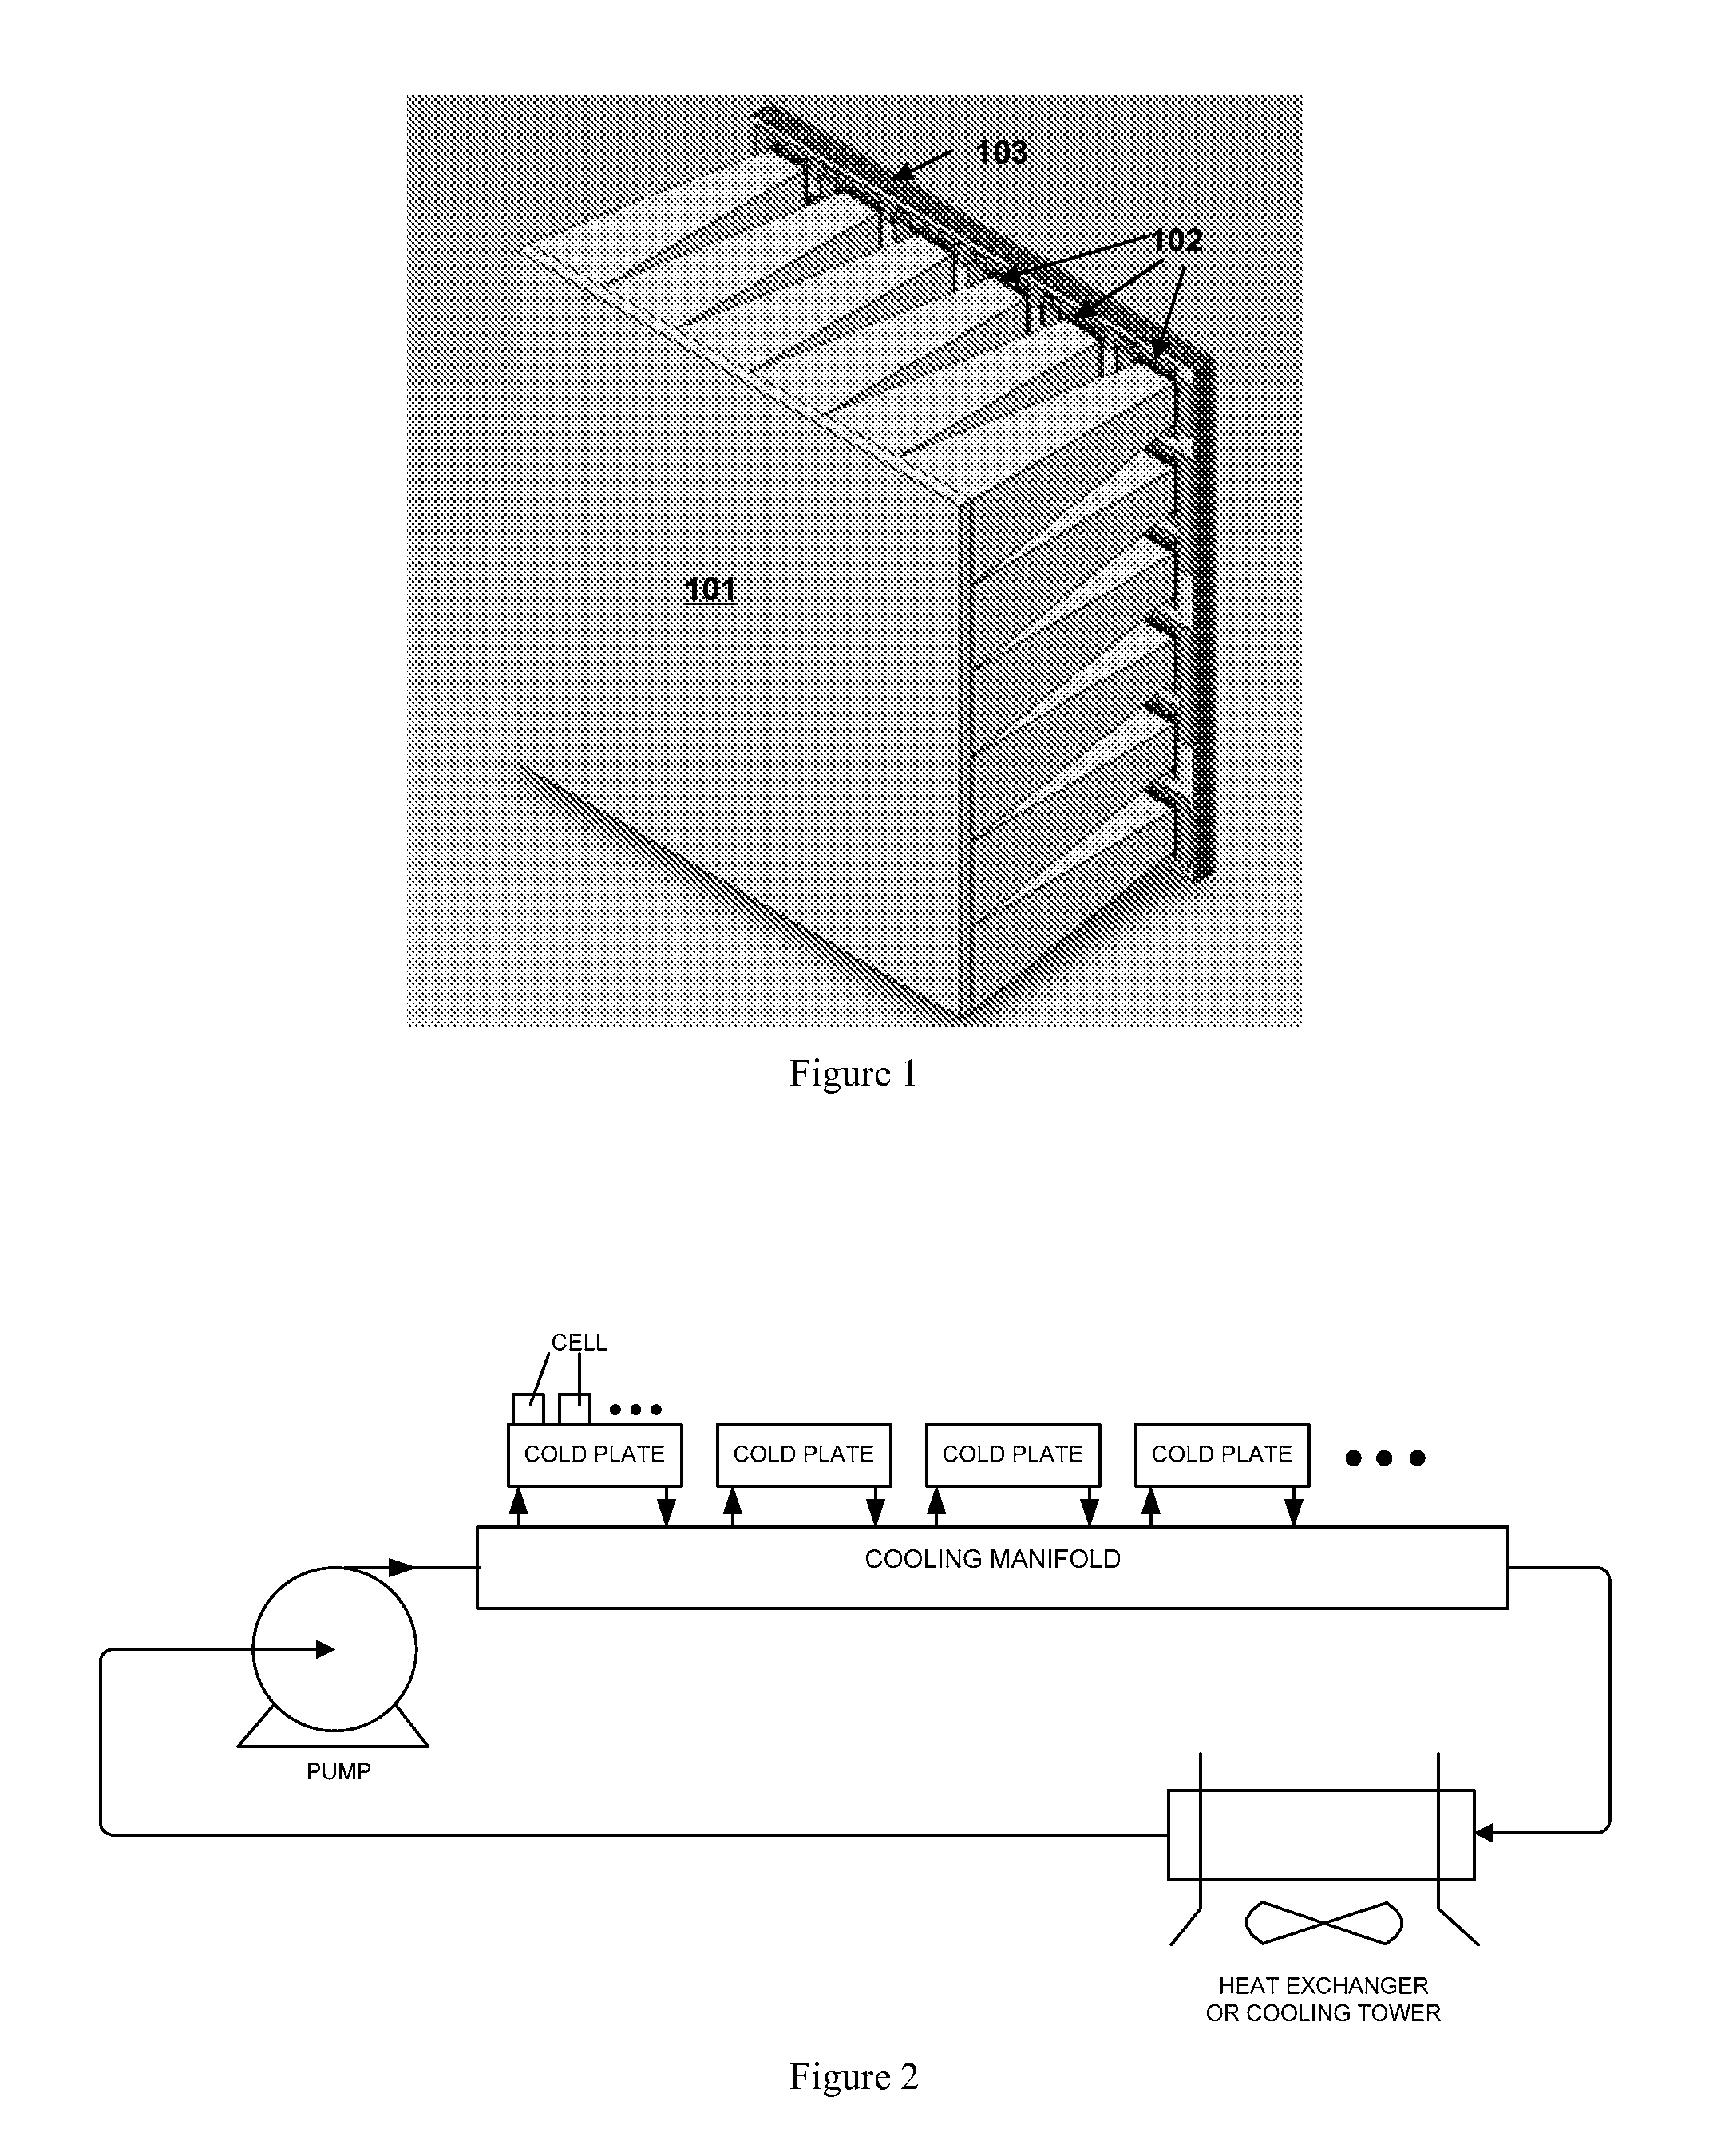 Heat exchanger apparatus and methods of manufacturing cross reference